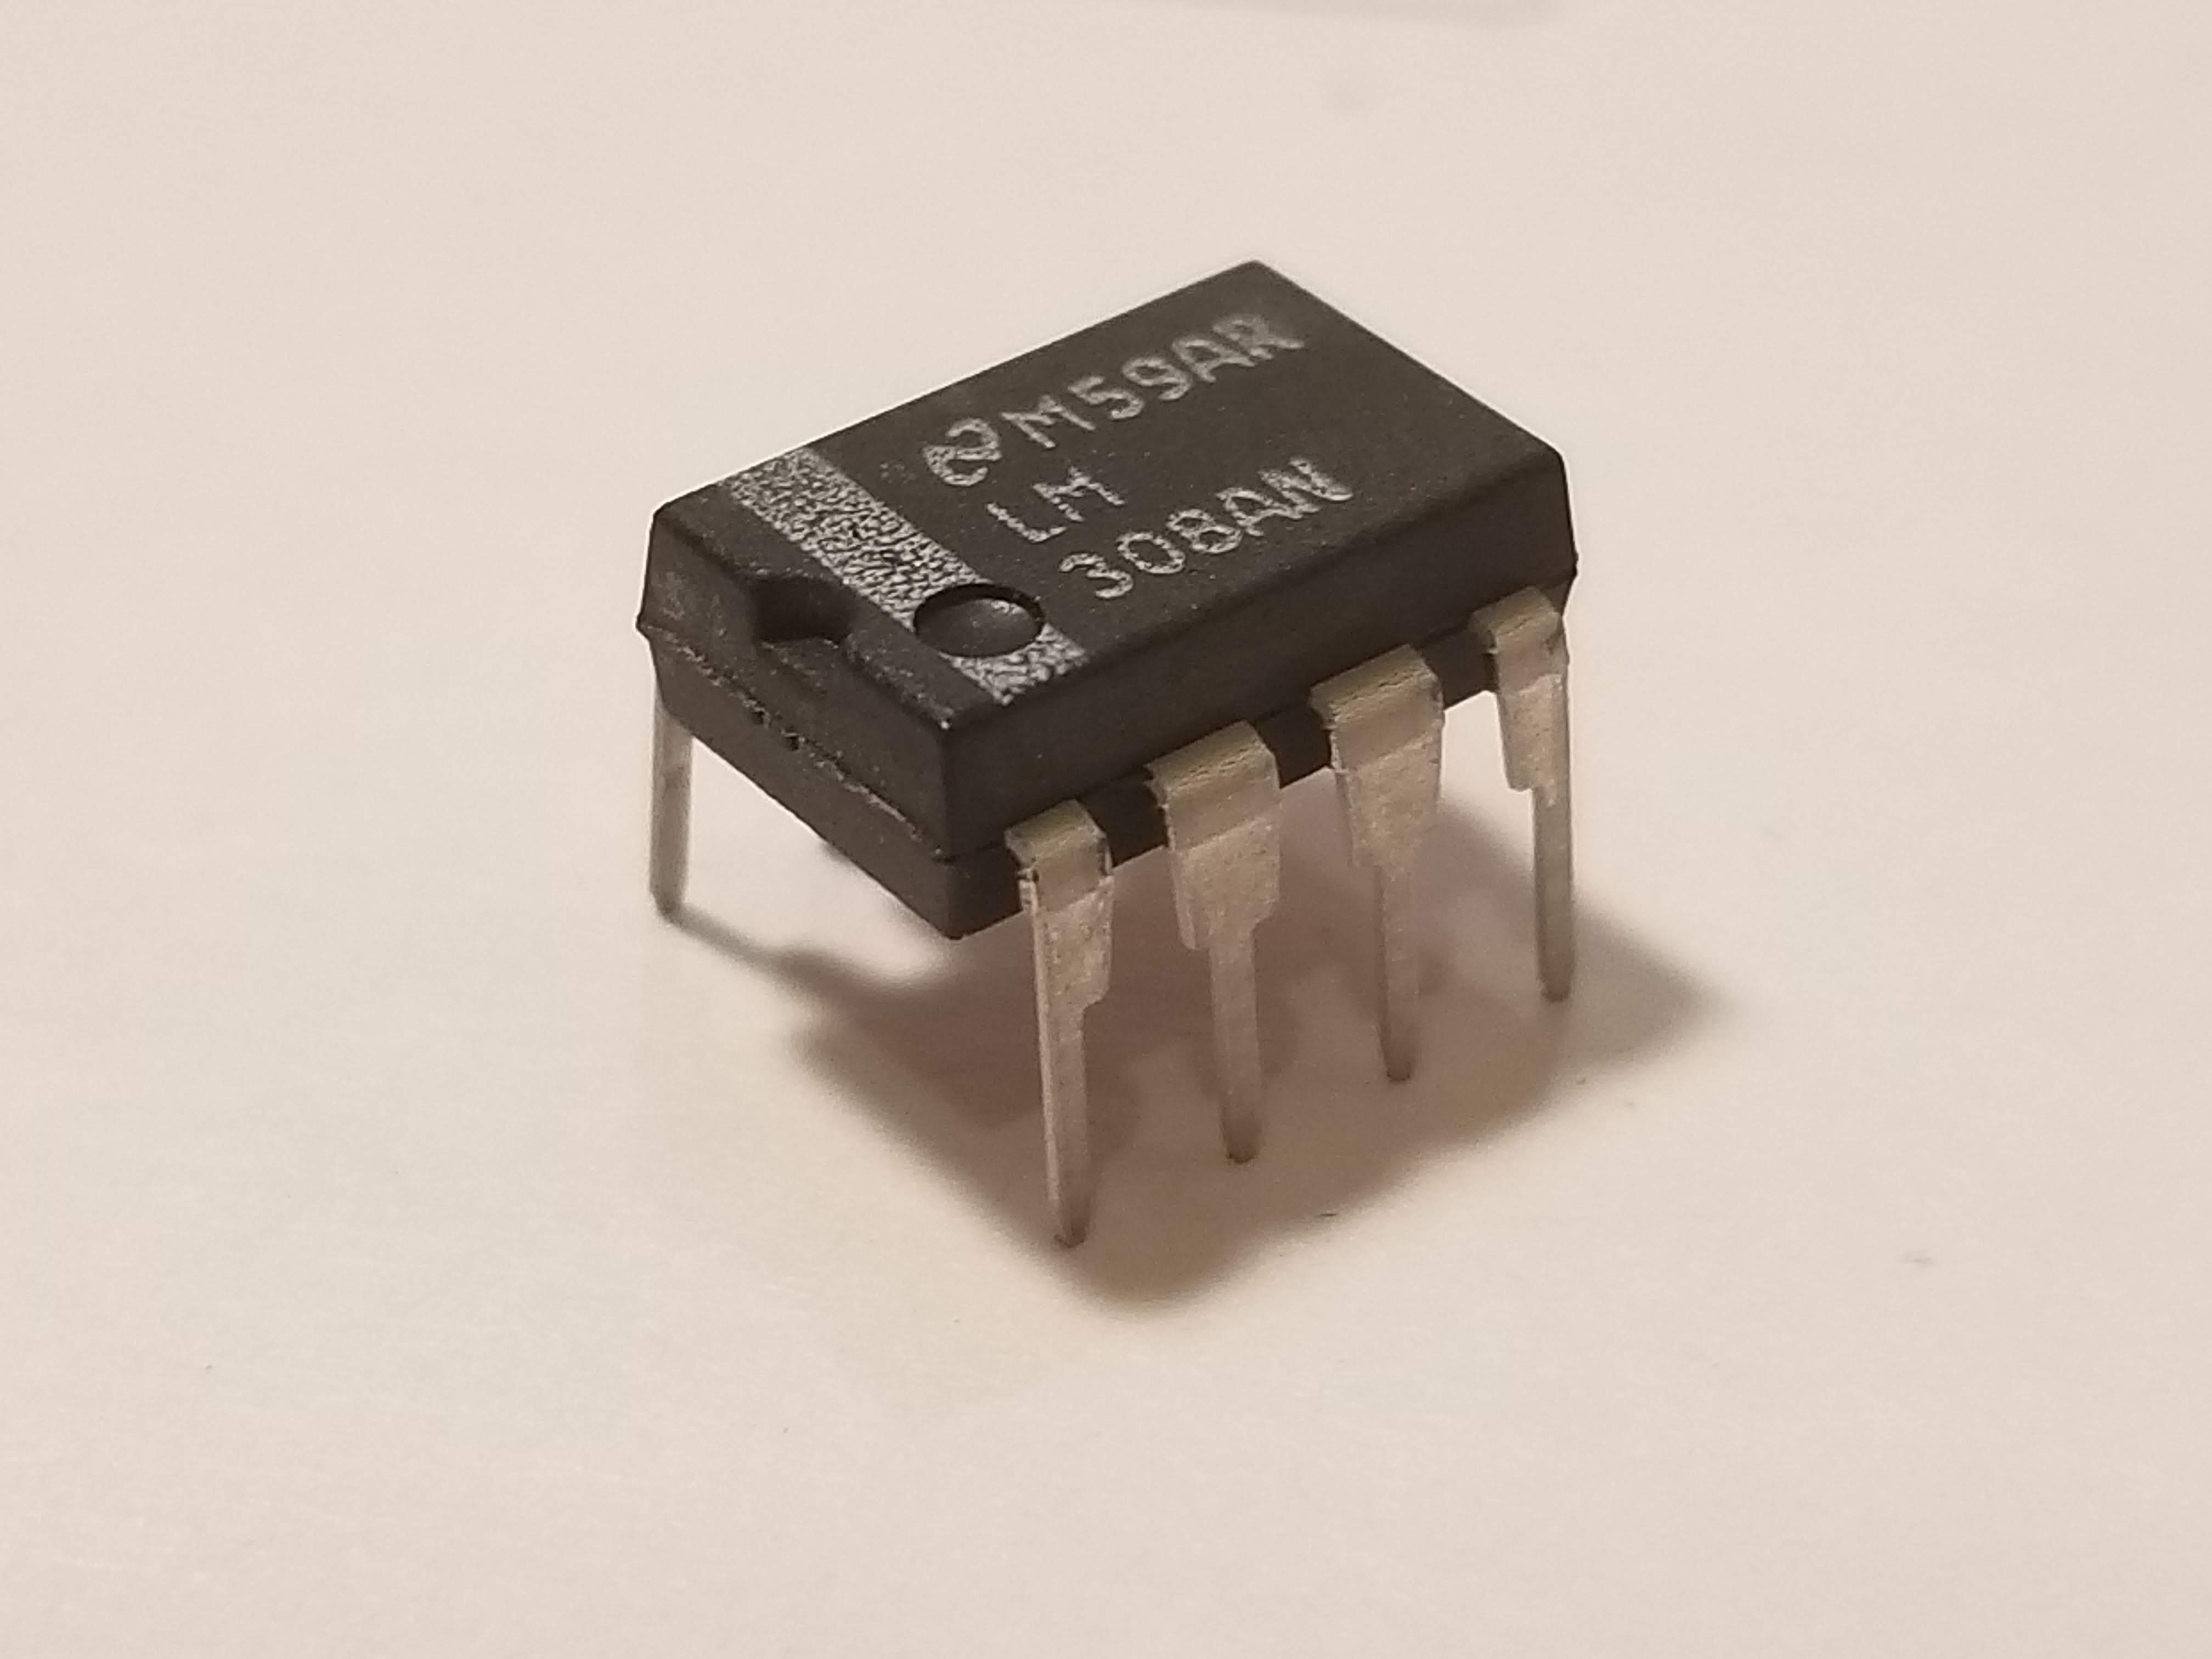 Picture of LM308 Non-Compensated Op-Amp